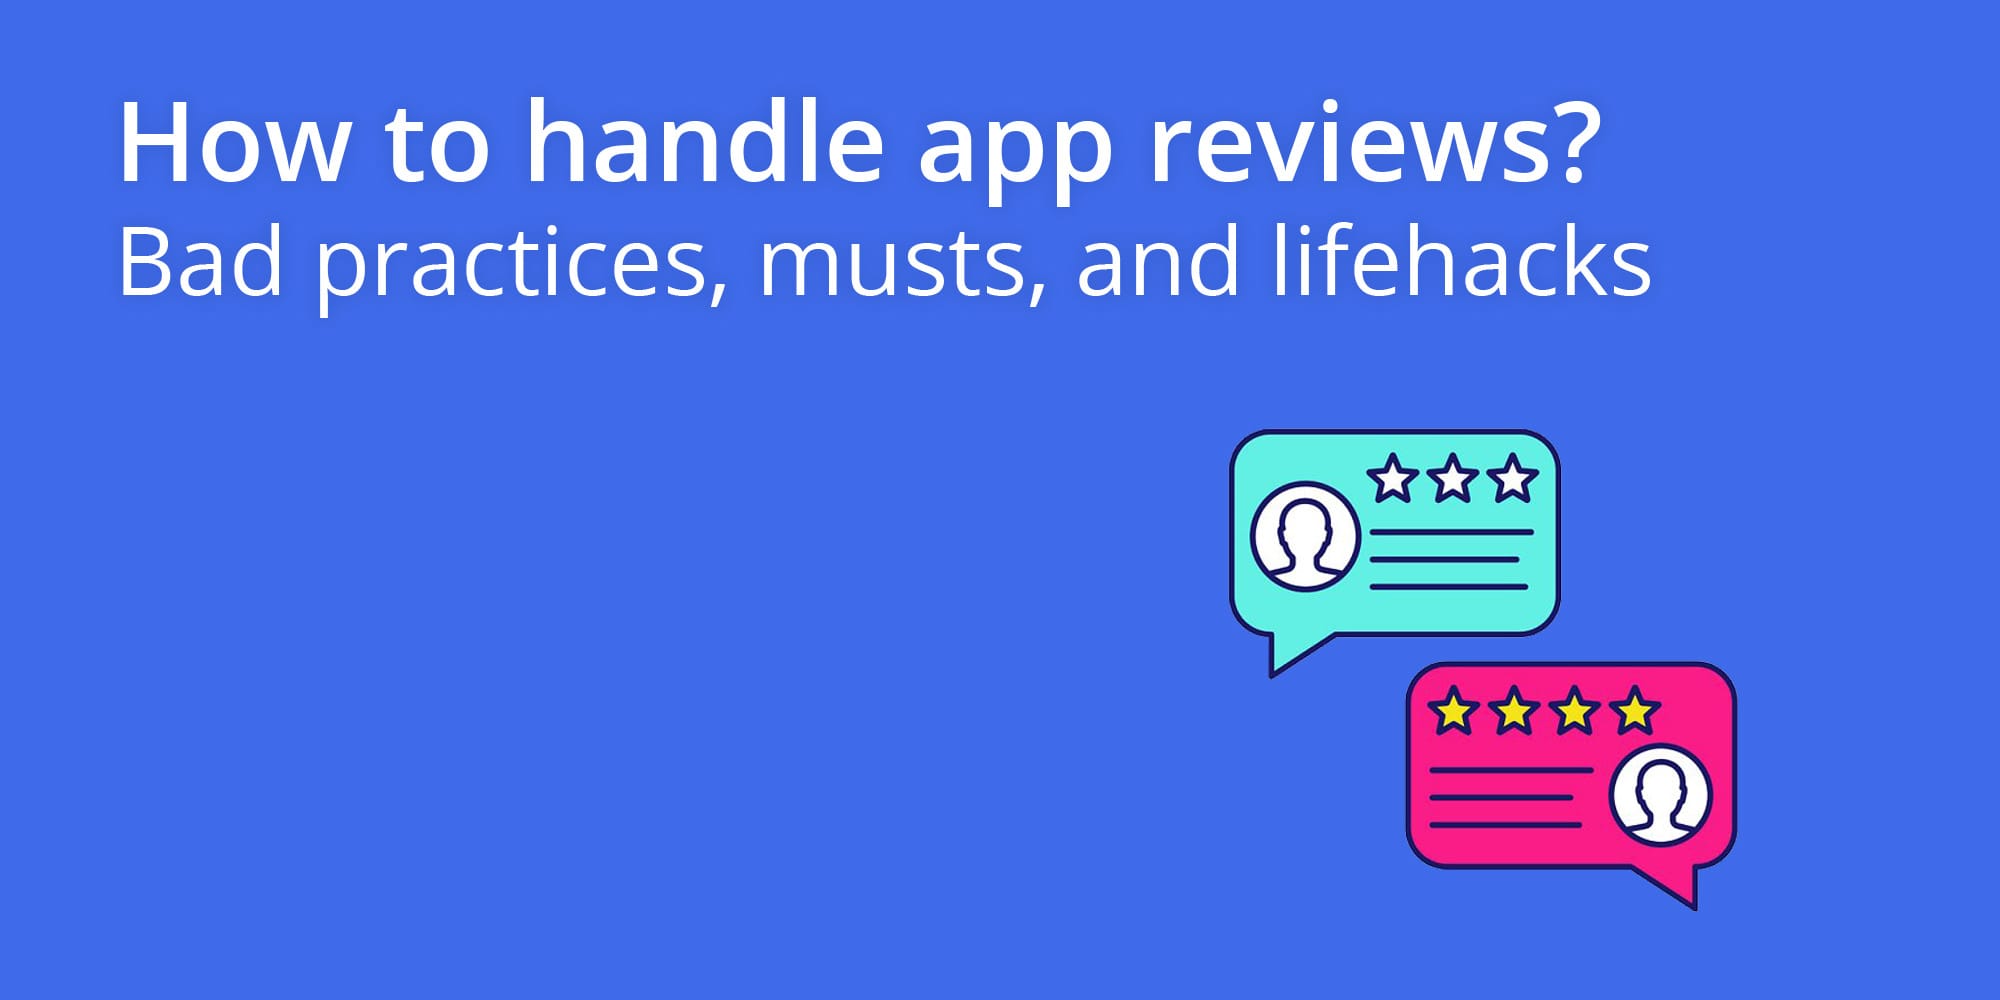 How to handle app reviews? Bad practices, musts, and lifehacks